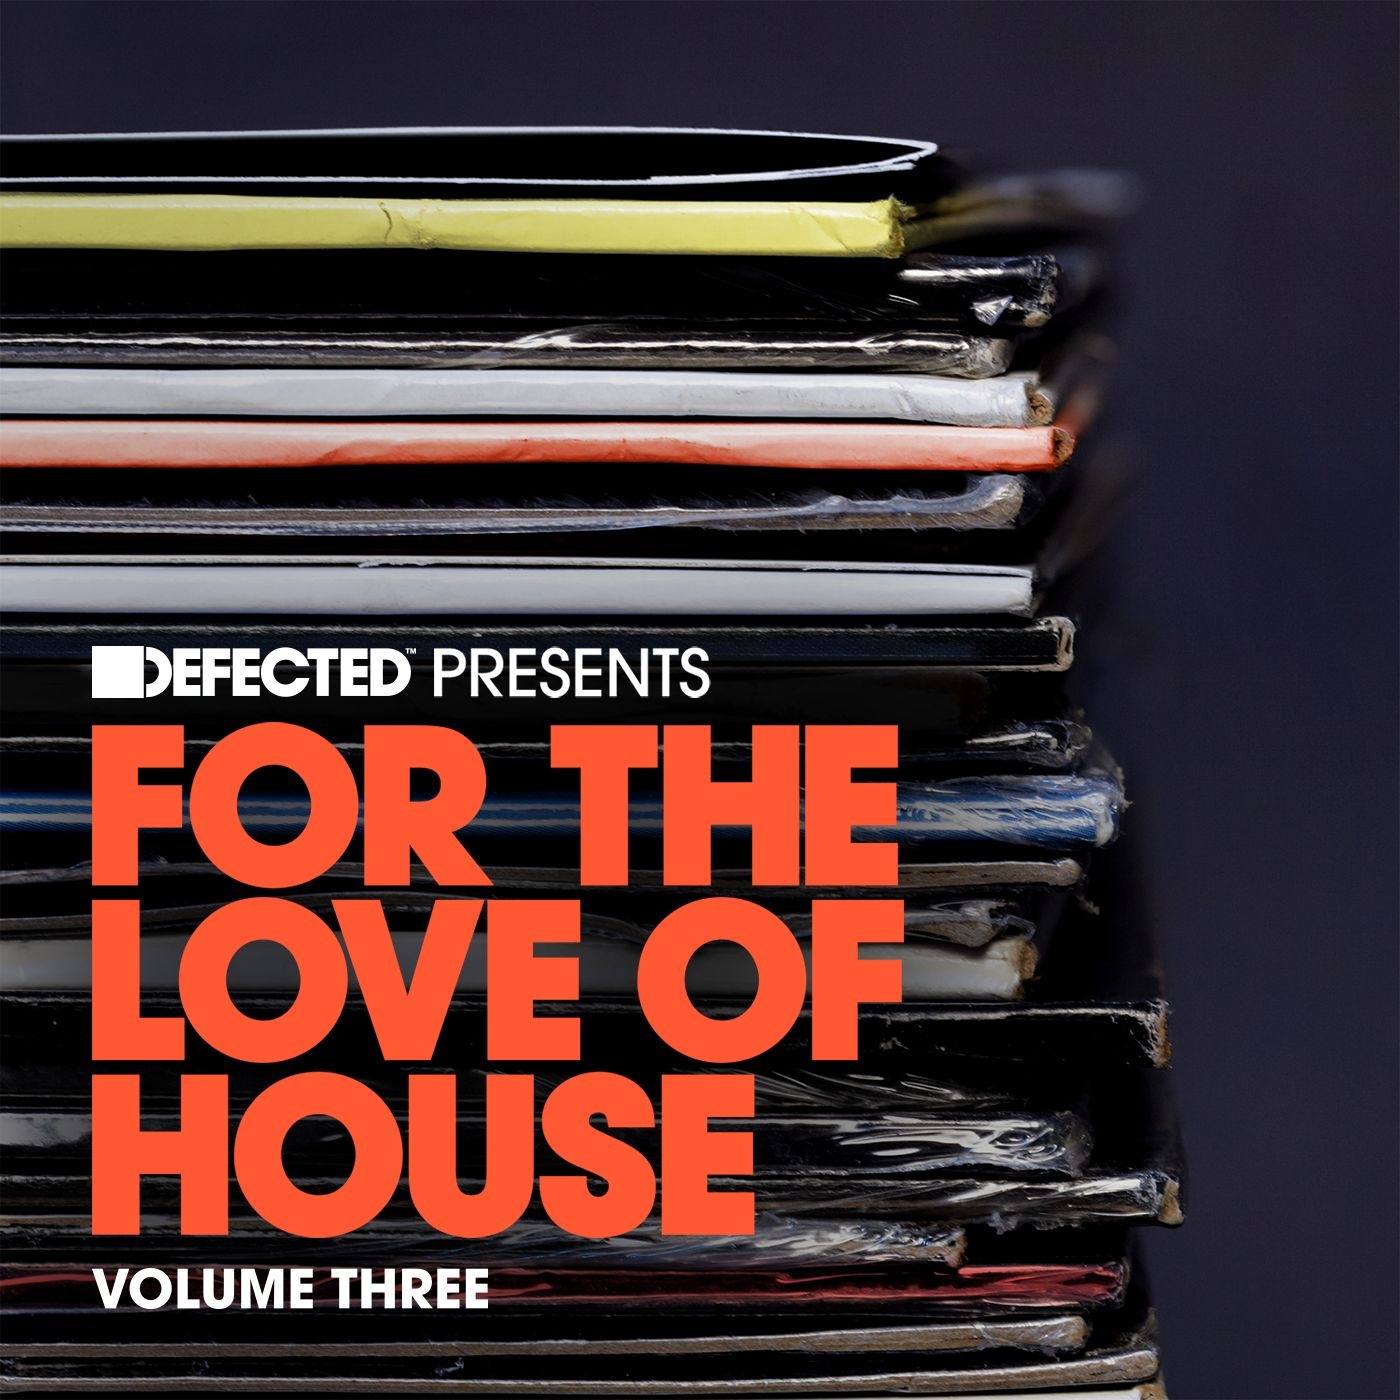 Defected presents For The Love Of House Volume 3 Mix 1